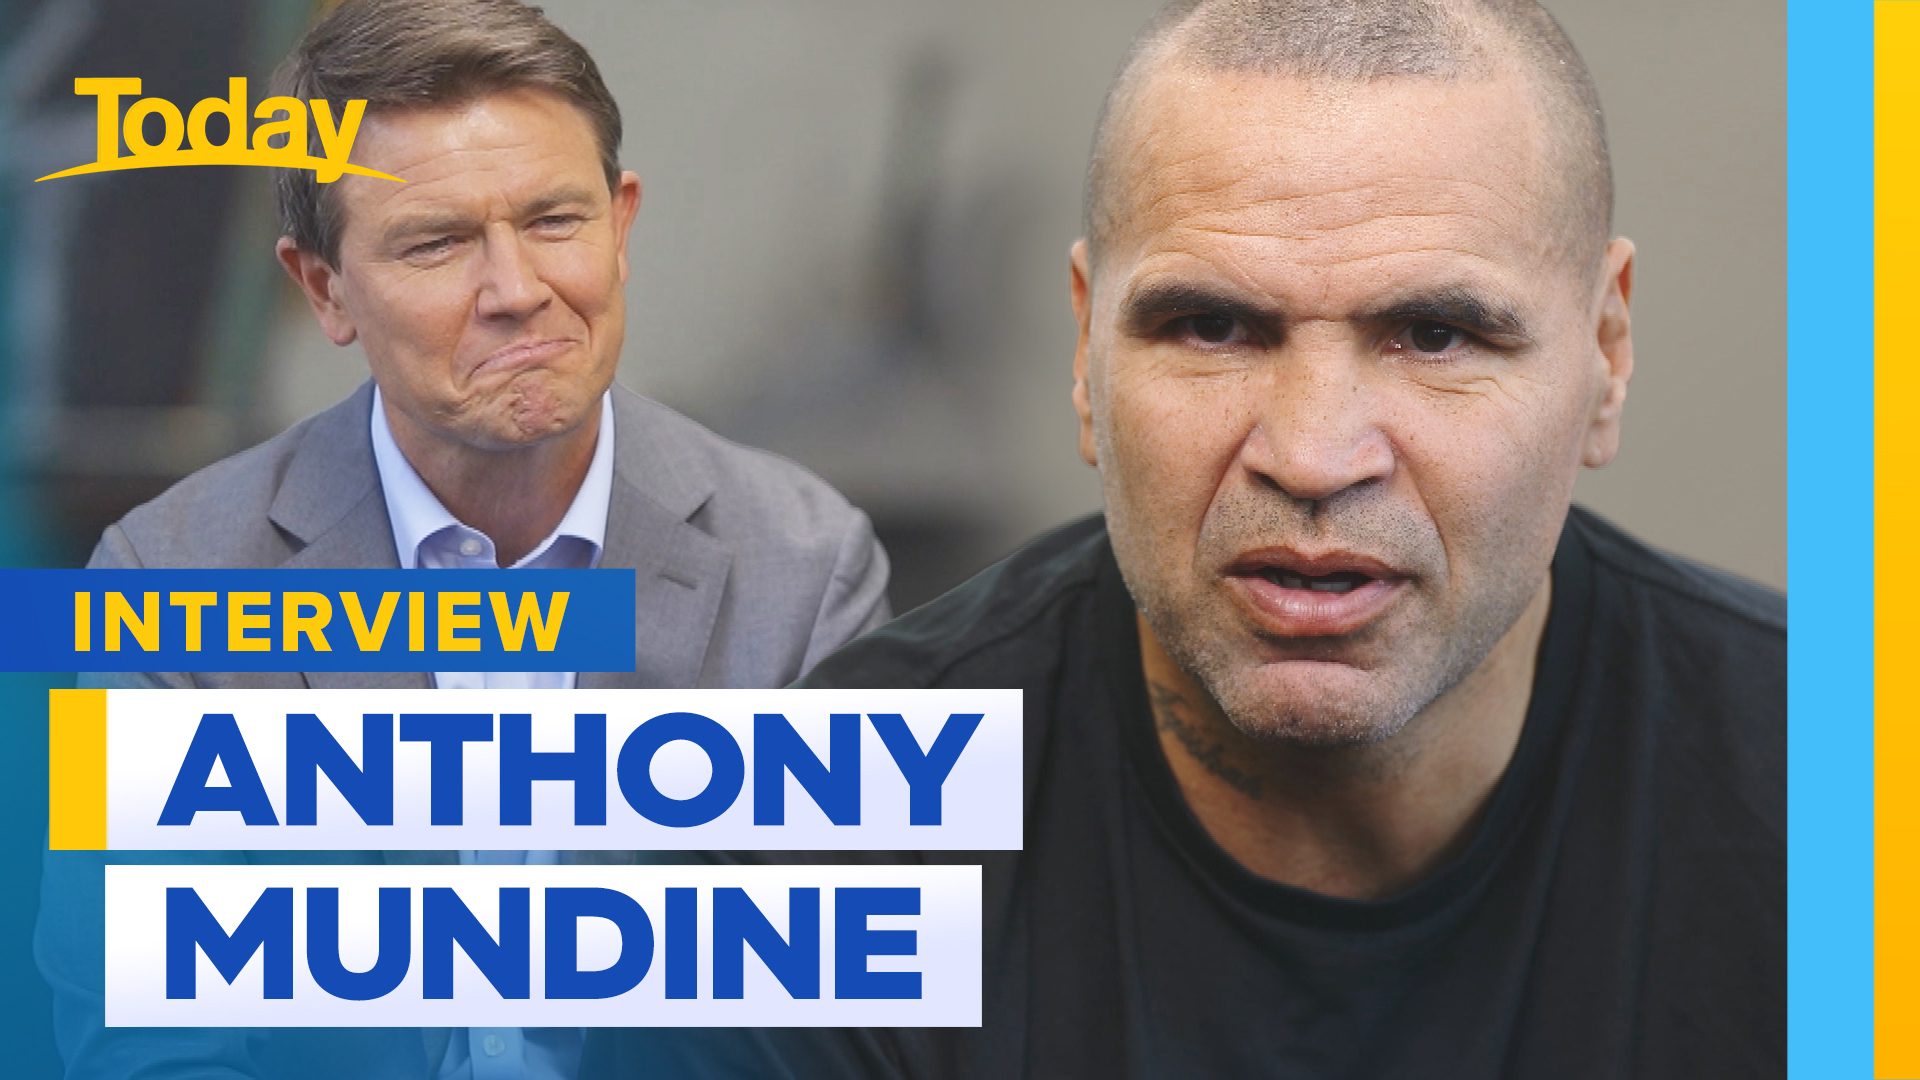 Alex Cullen sits down with Anthony Mundine